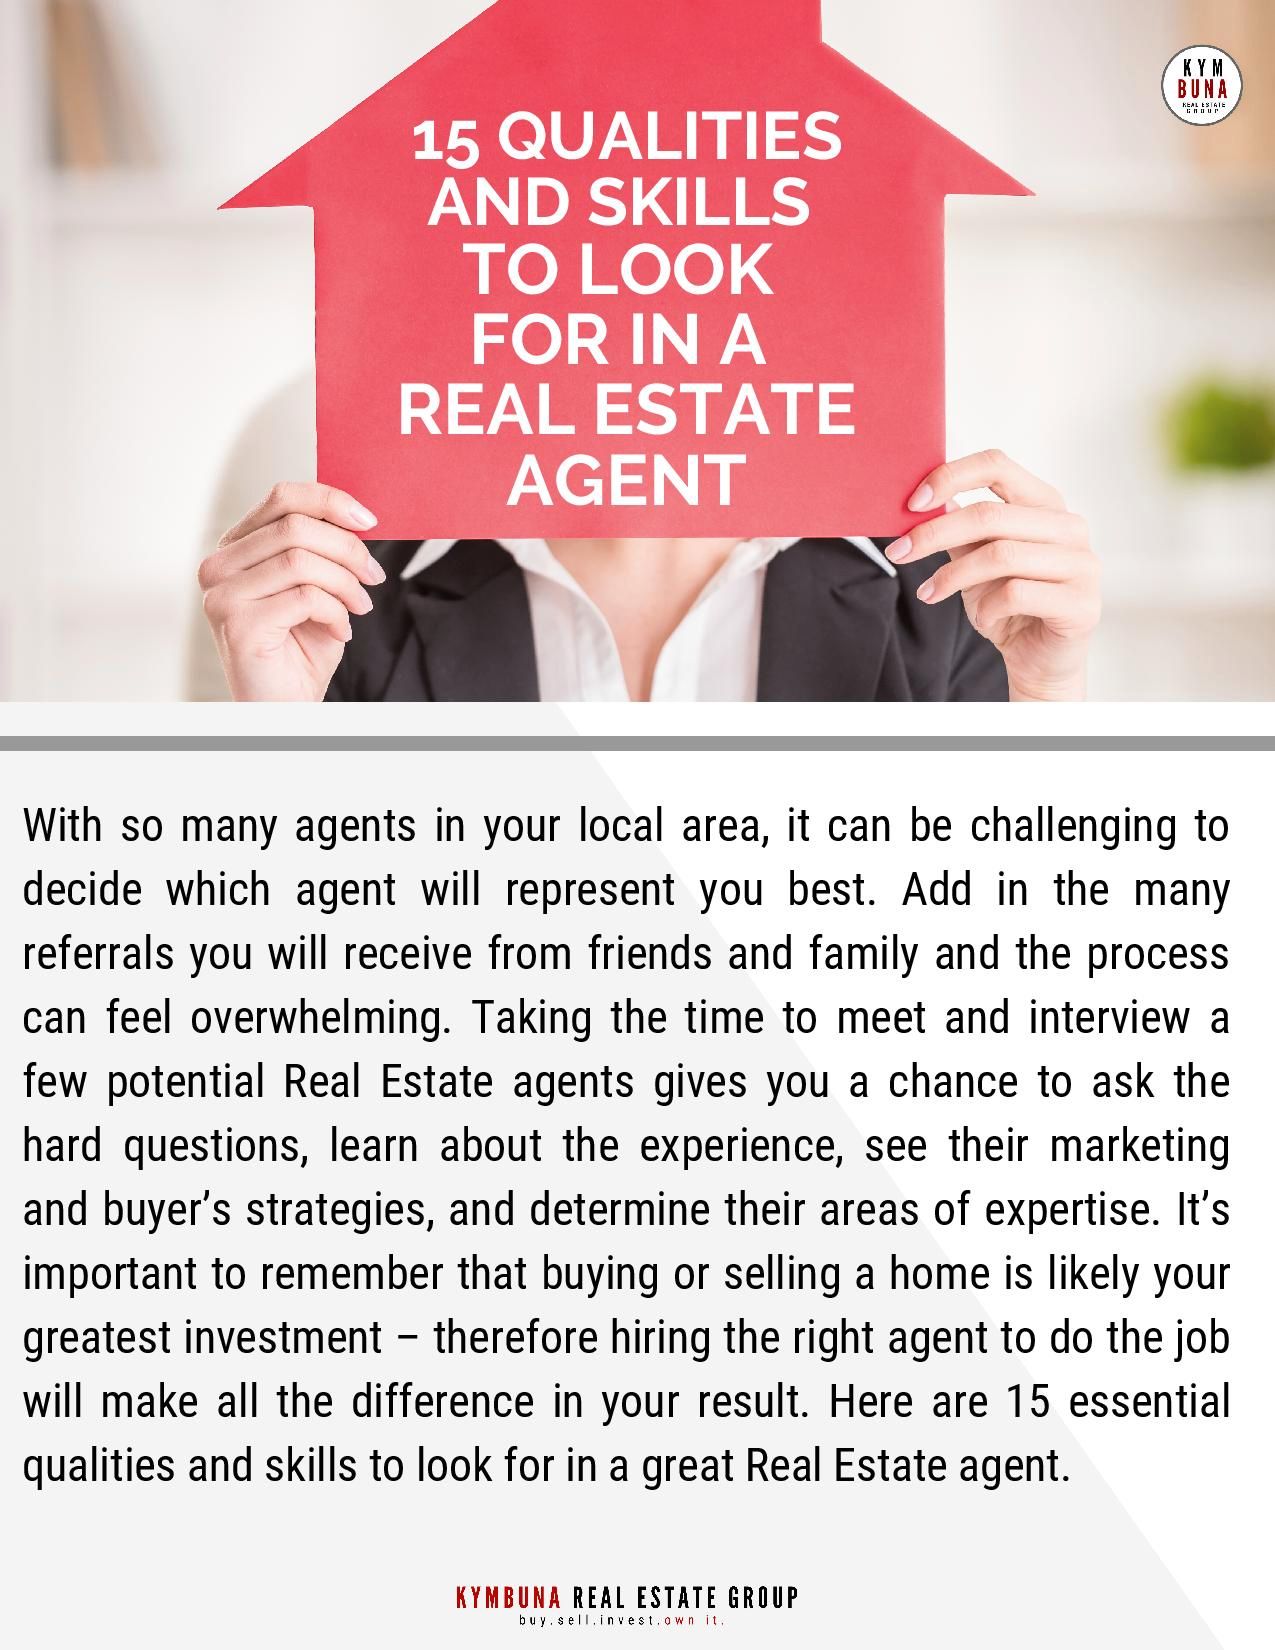 15 Qualities and Skills to Look for in a Real Estate Agent